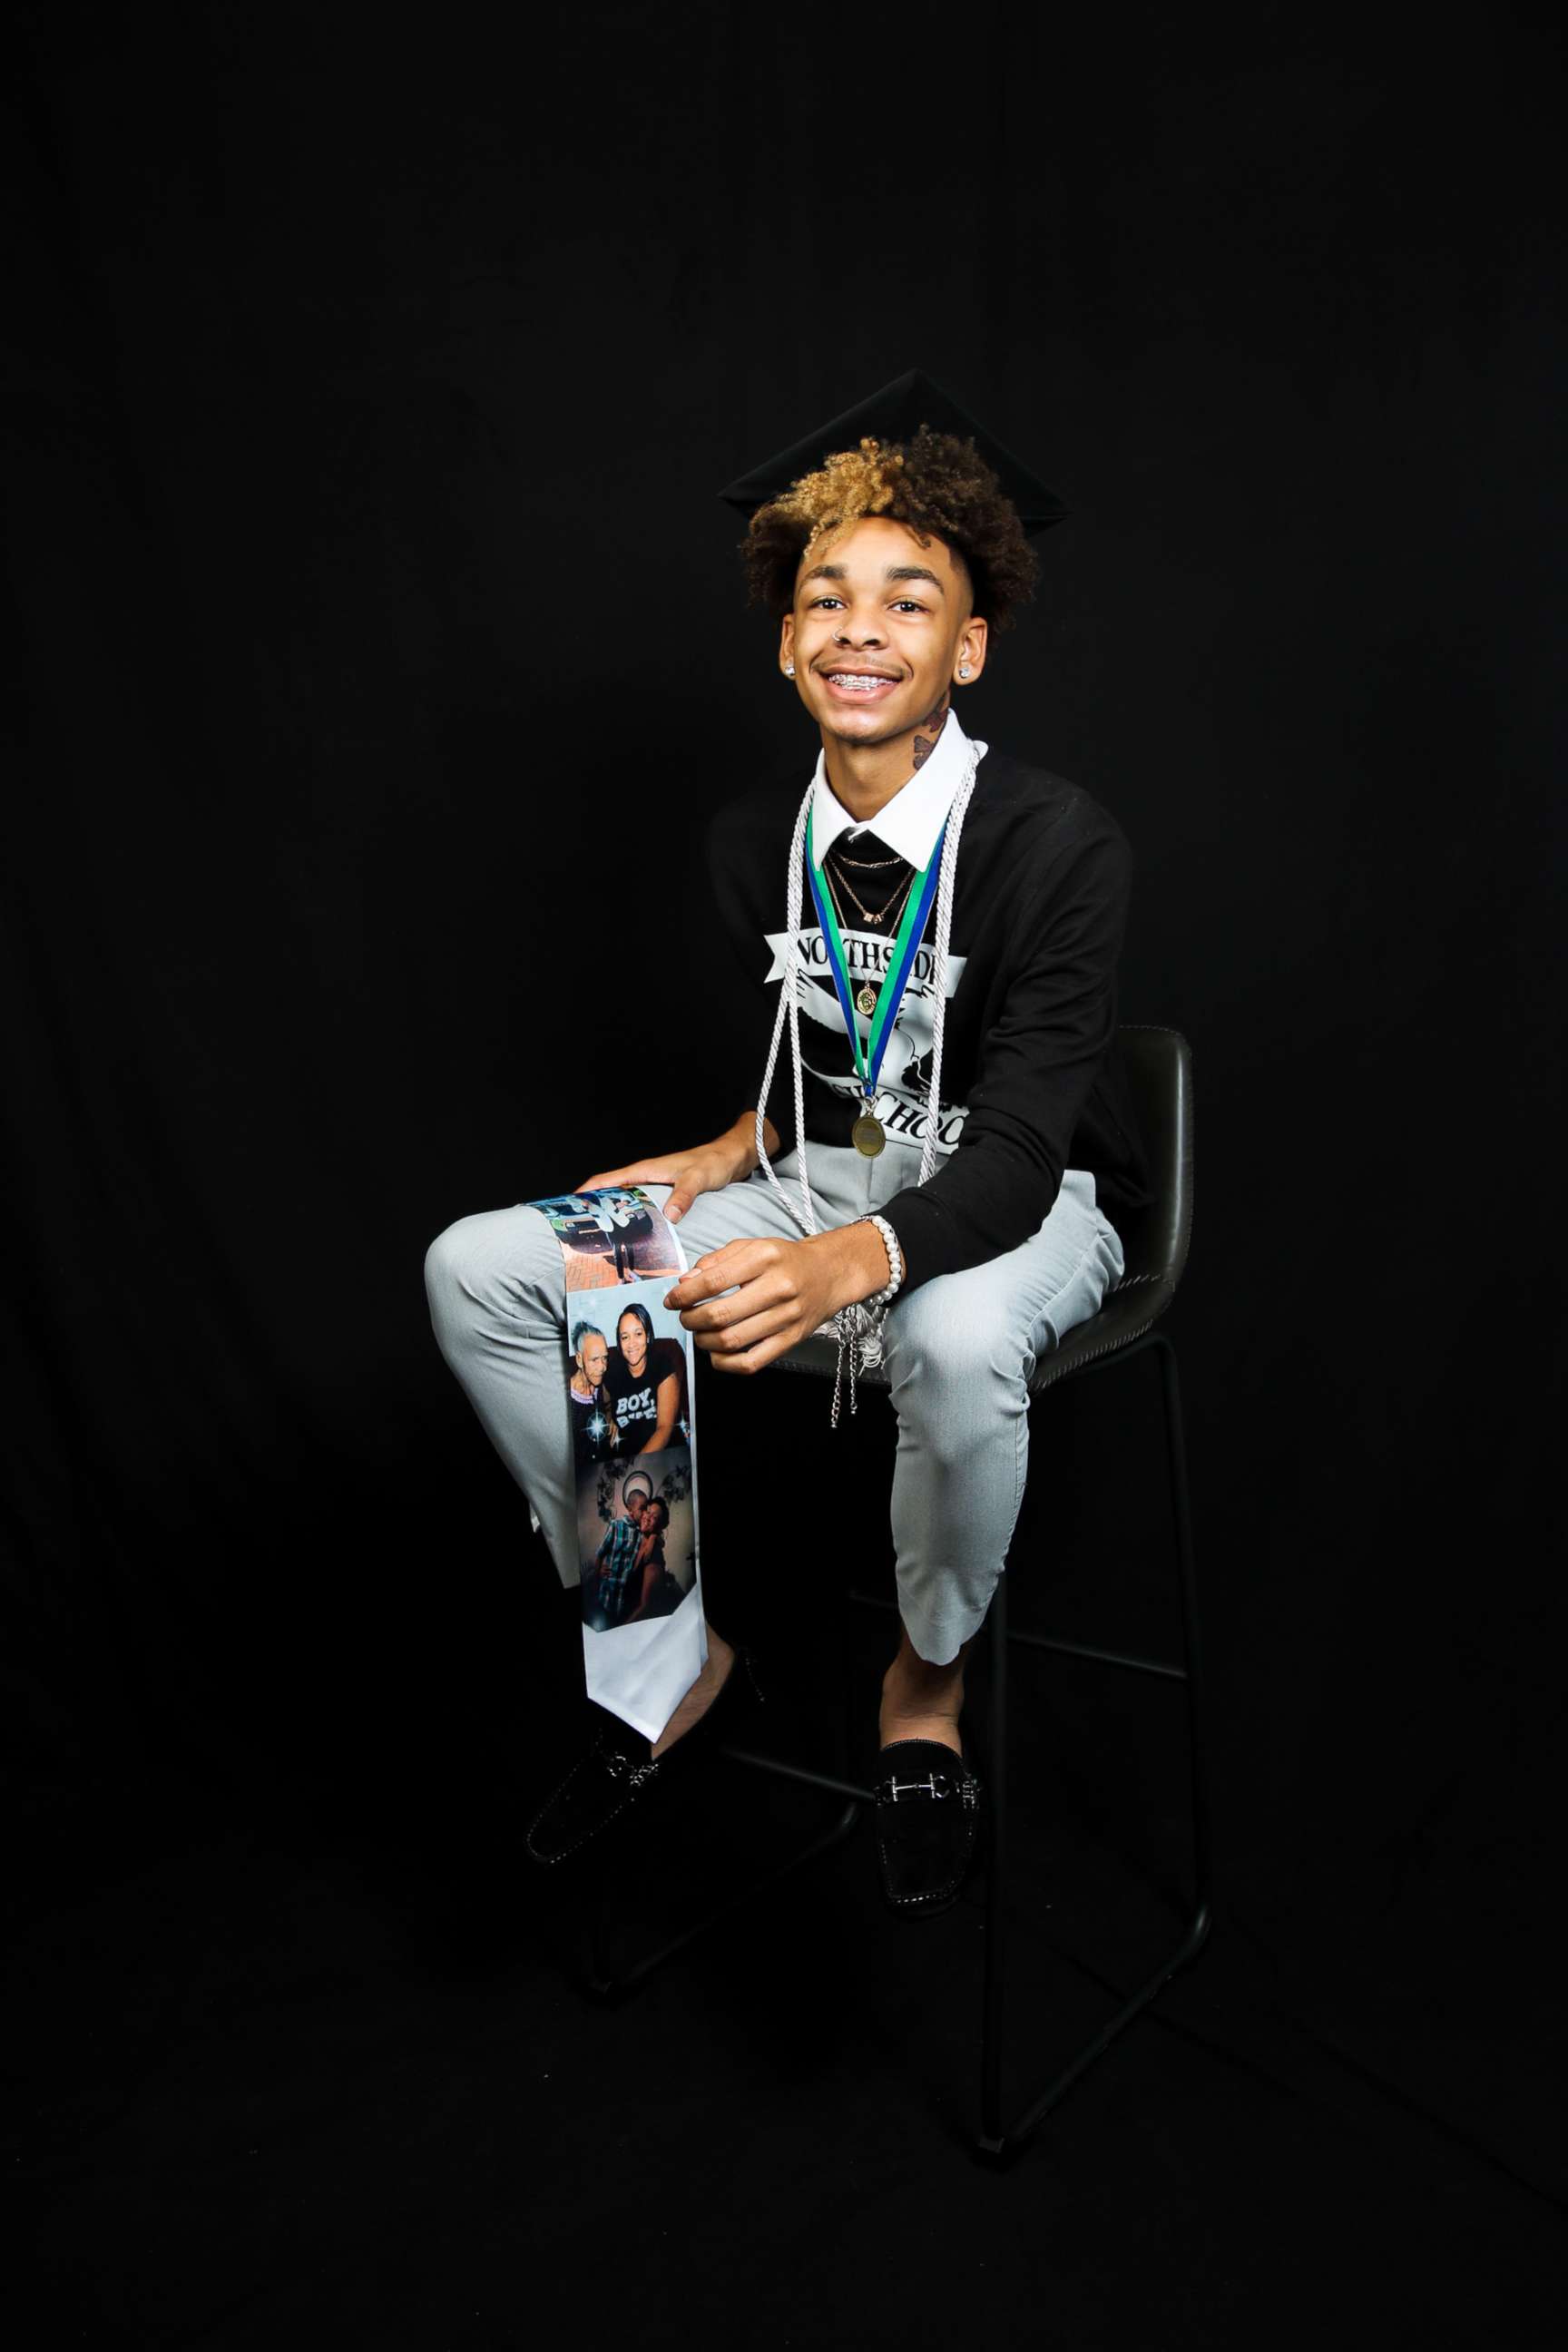 PHOTO: 	KJ Morgan, 17, from Georgia, honored his late mom, who aspired to be cheering at his graduation, with a photoshoot that included pictures of her.